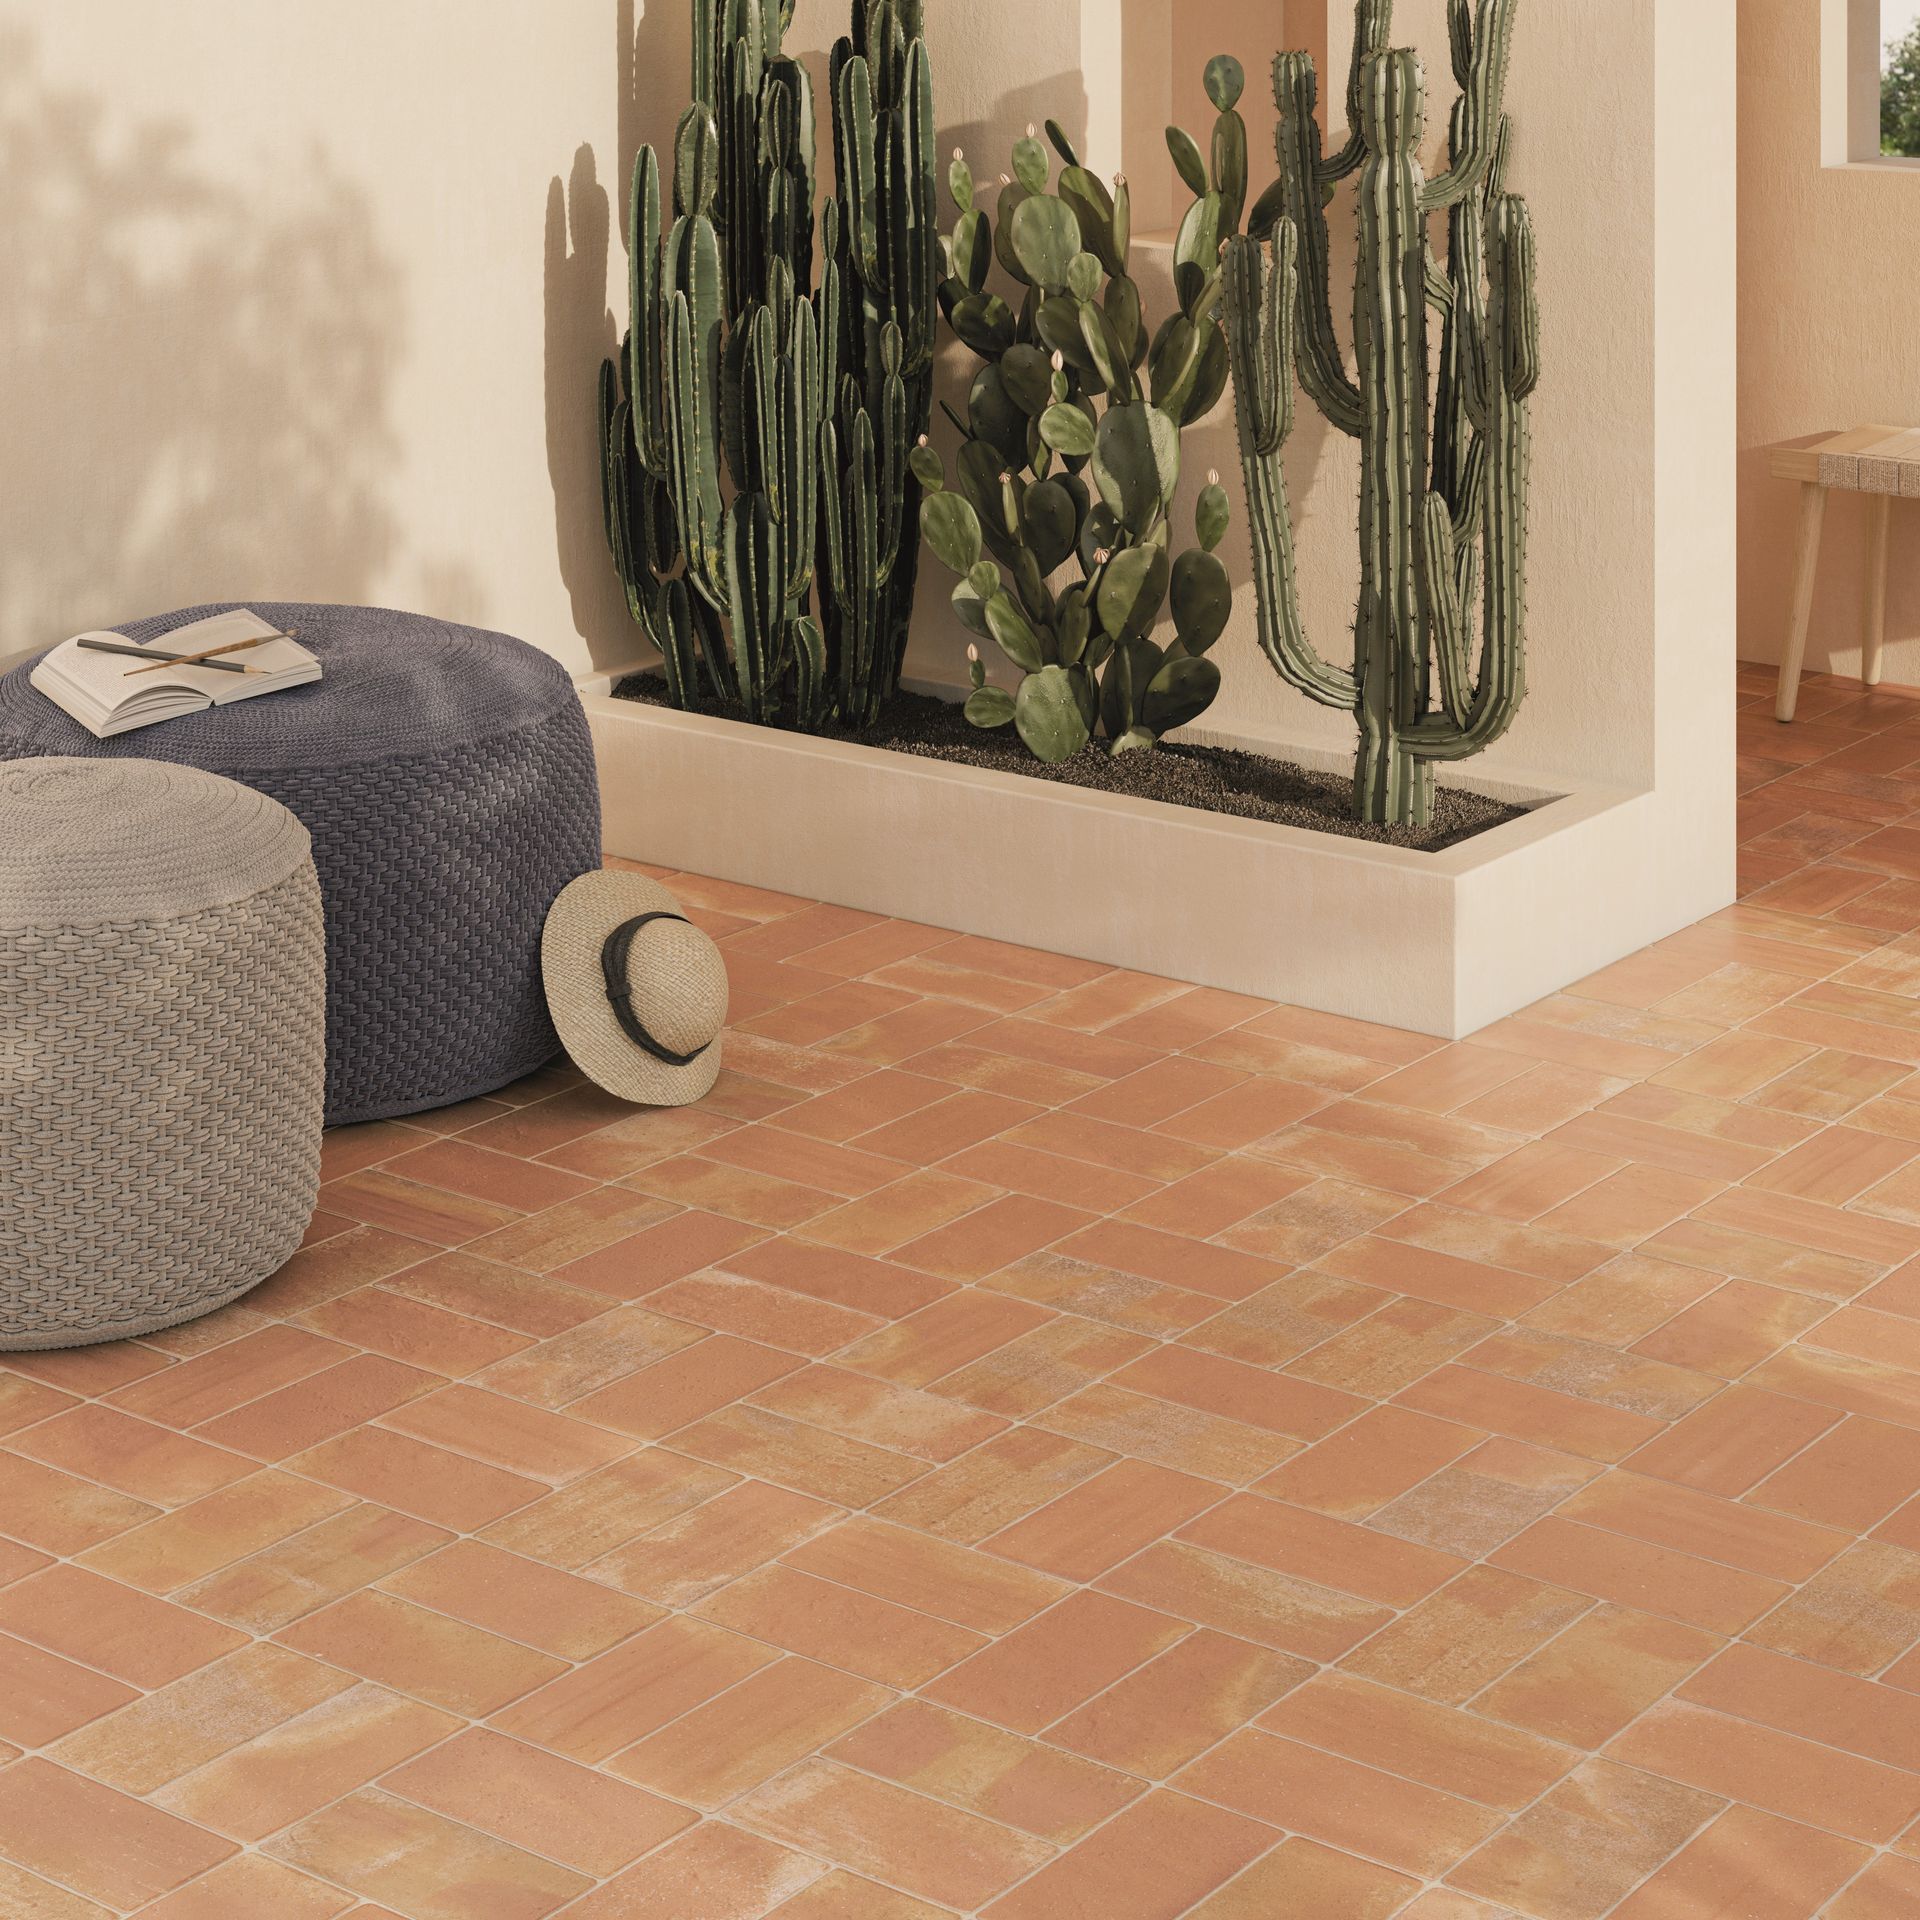 a terracotta like tile used in a patio area with a green cactus